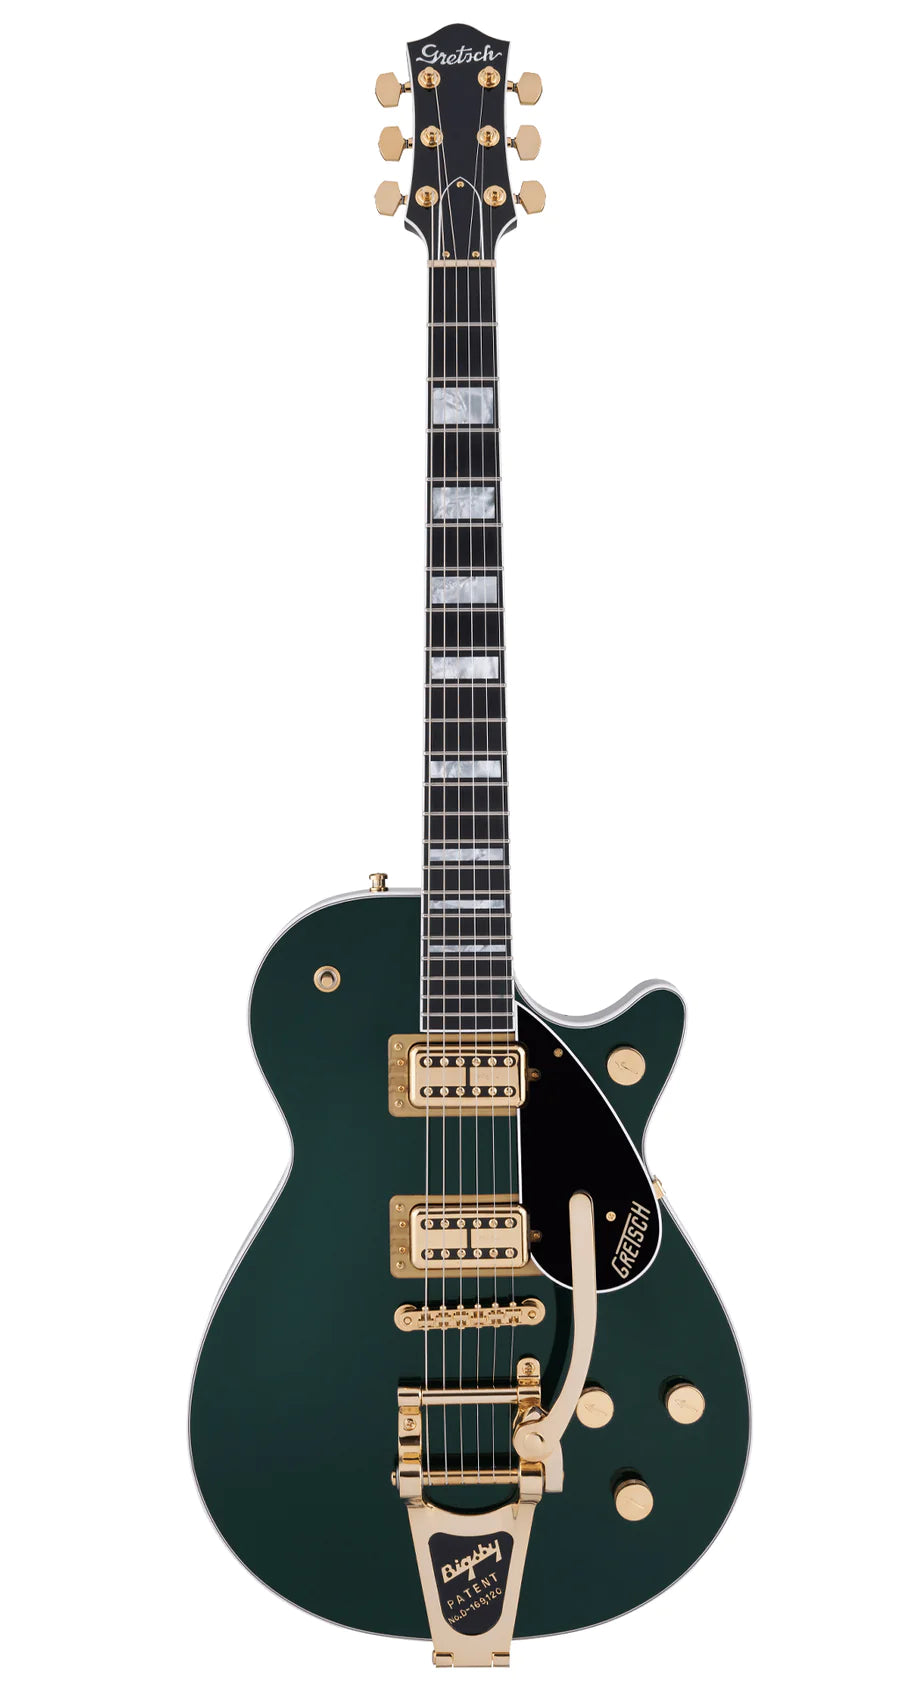 Gretsch G6228TG Players Edition Jet BT Electric Guitar - Cadillac Green